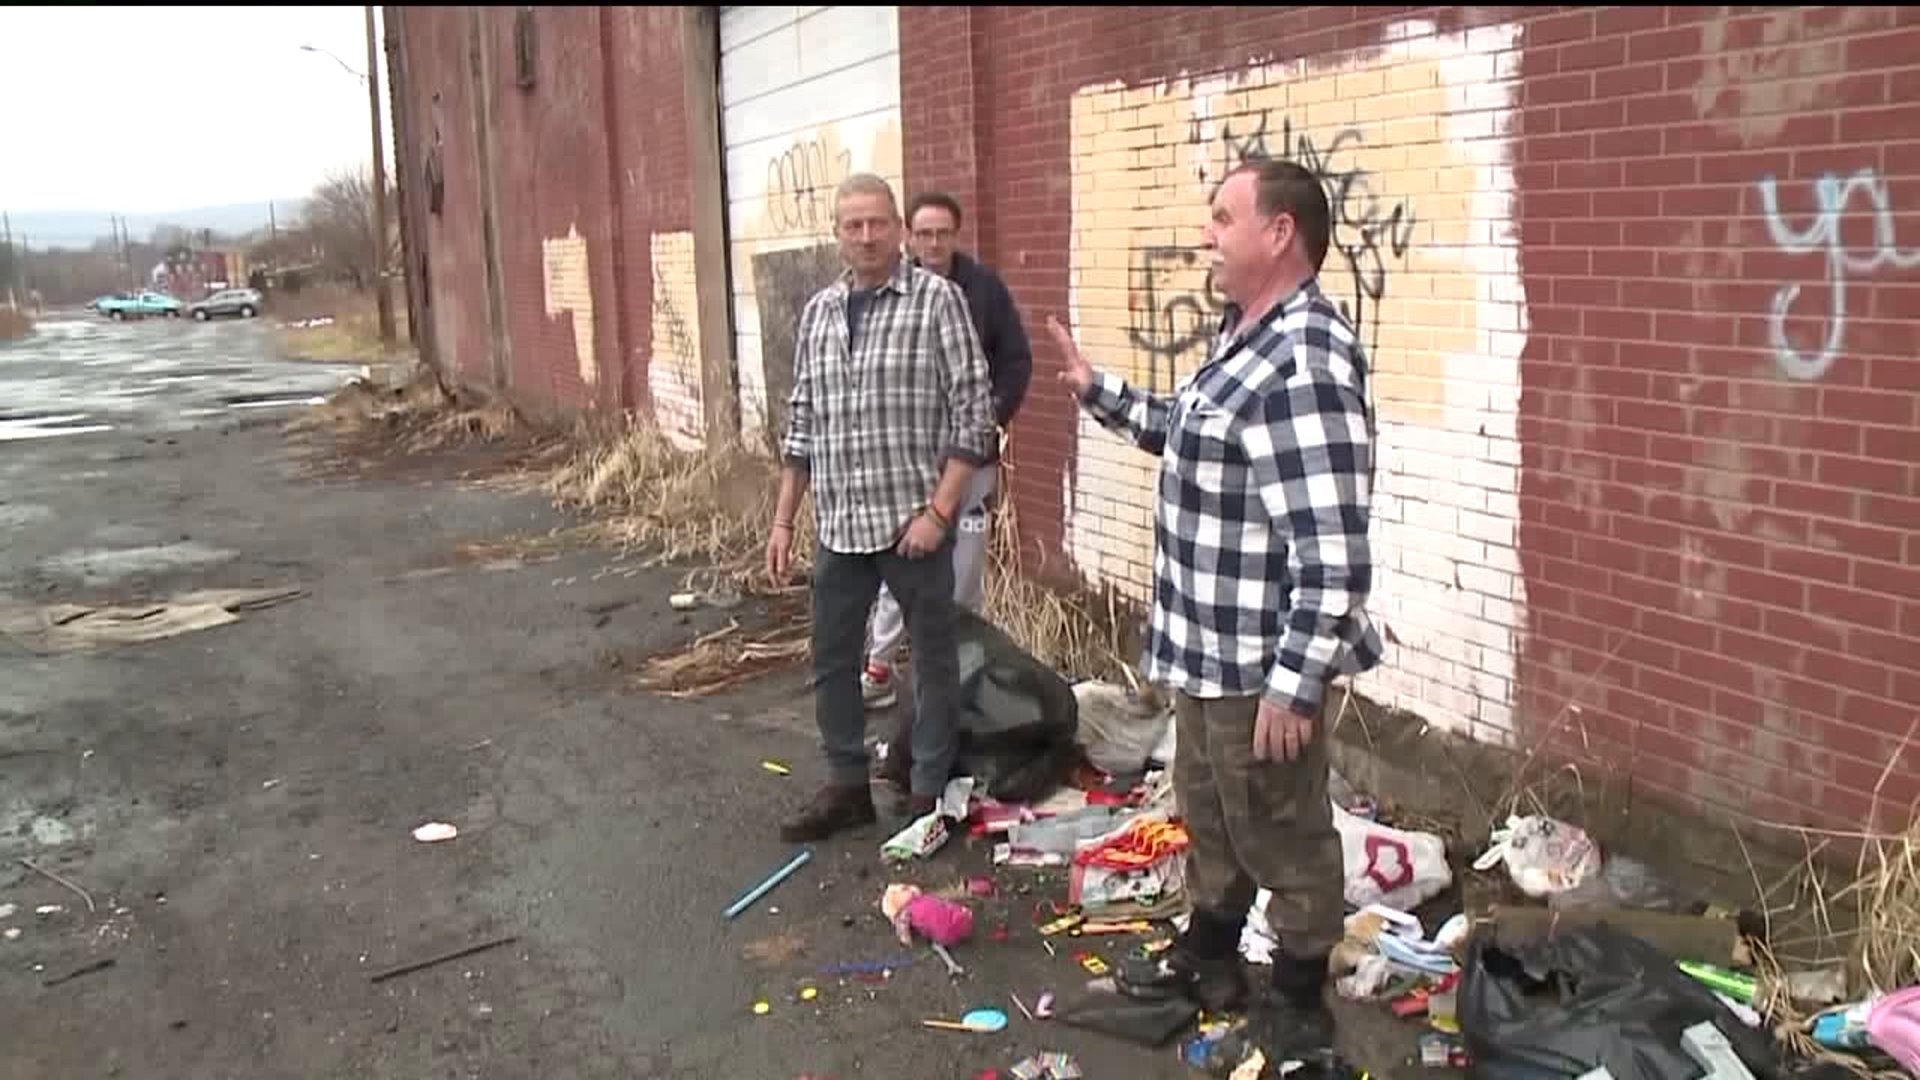 Non-Profit Works to Clean Up Wilkes-Barre